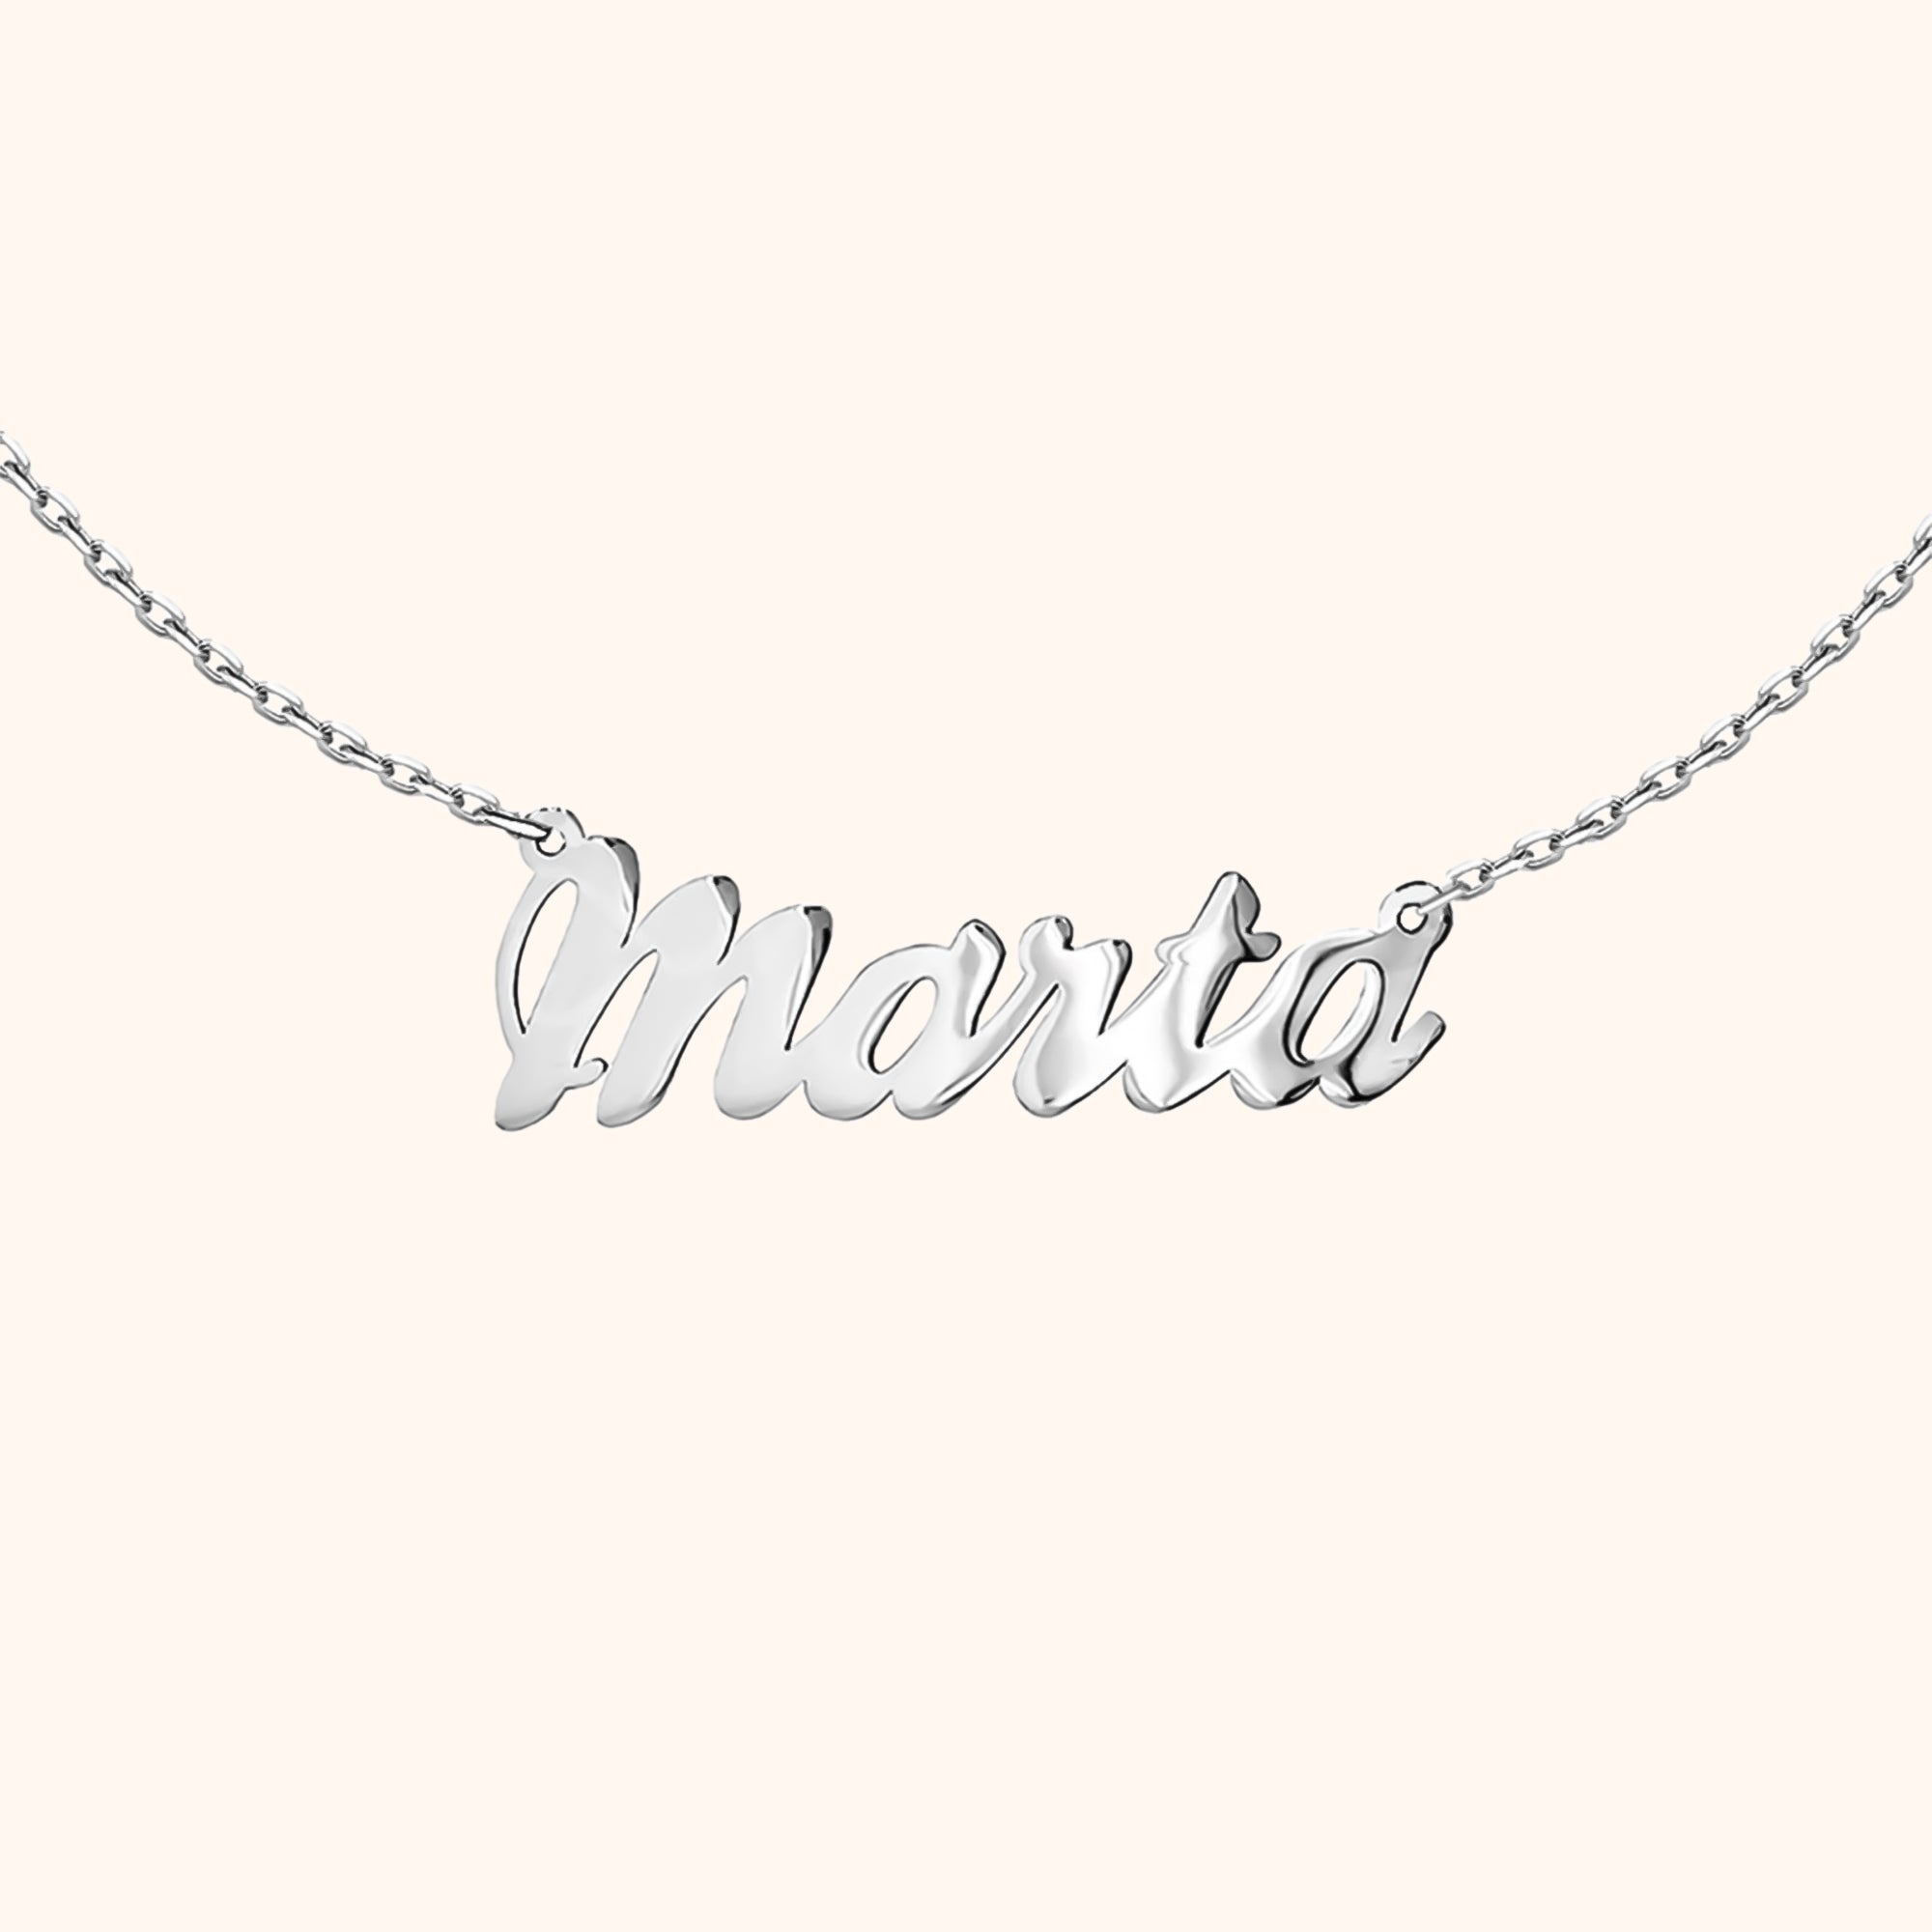 "Name" Necklace